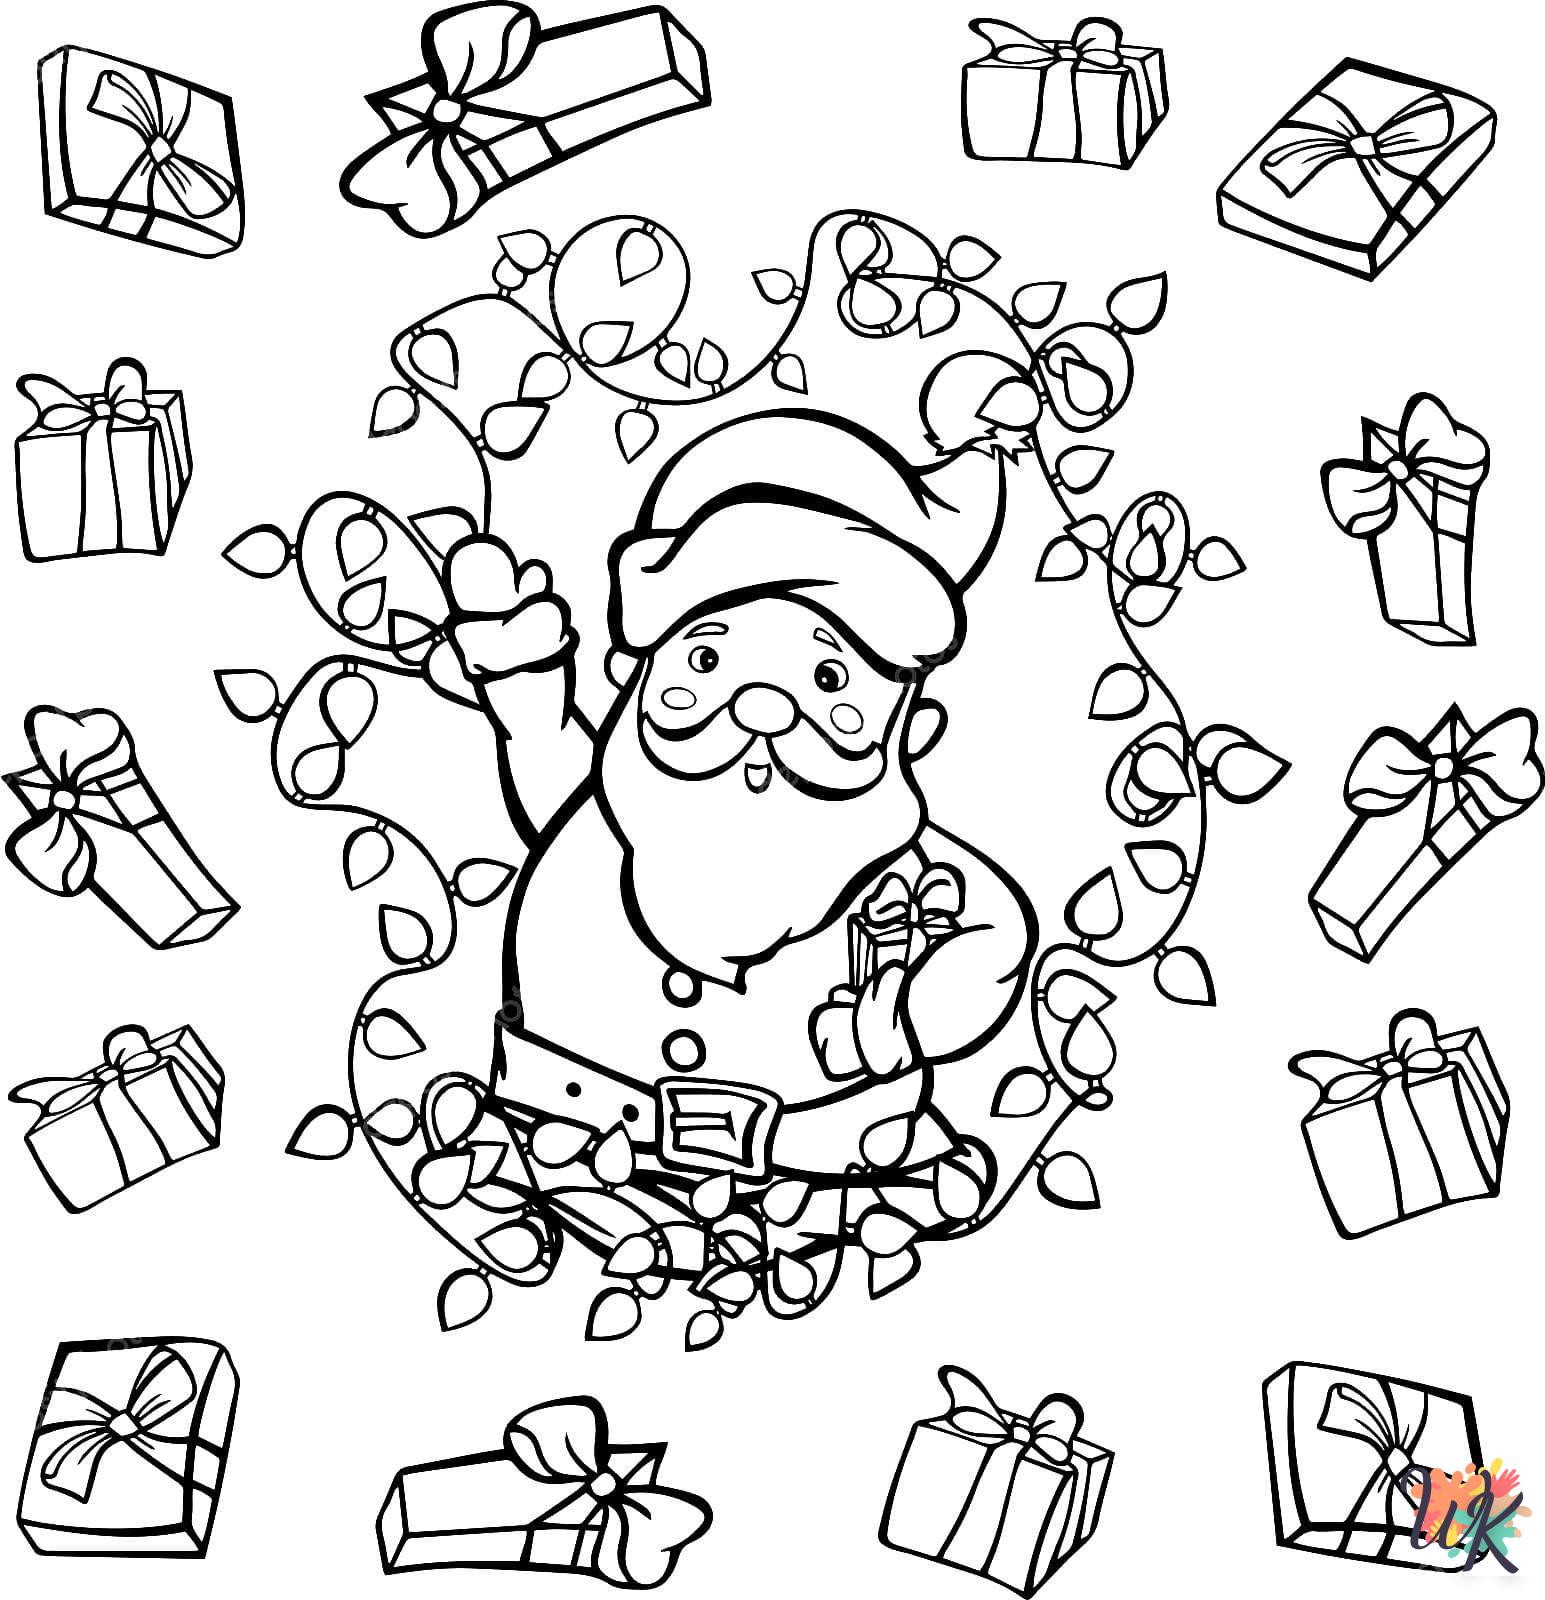 Santa coloring pages for adults pdf